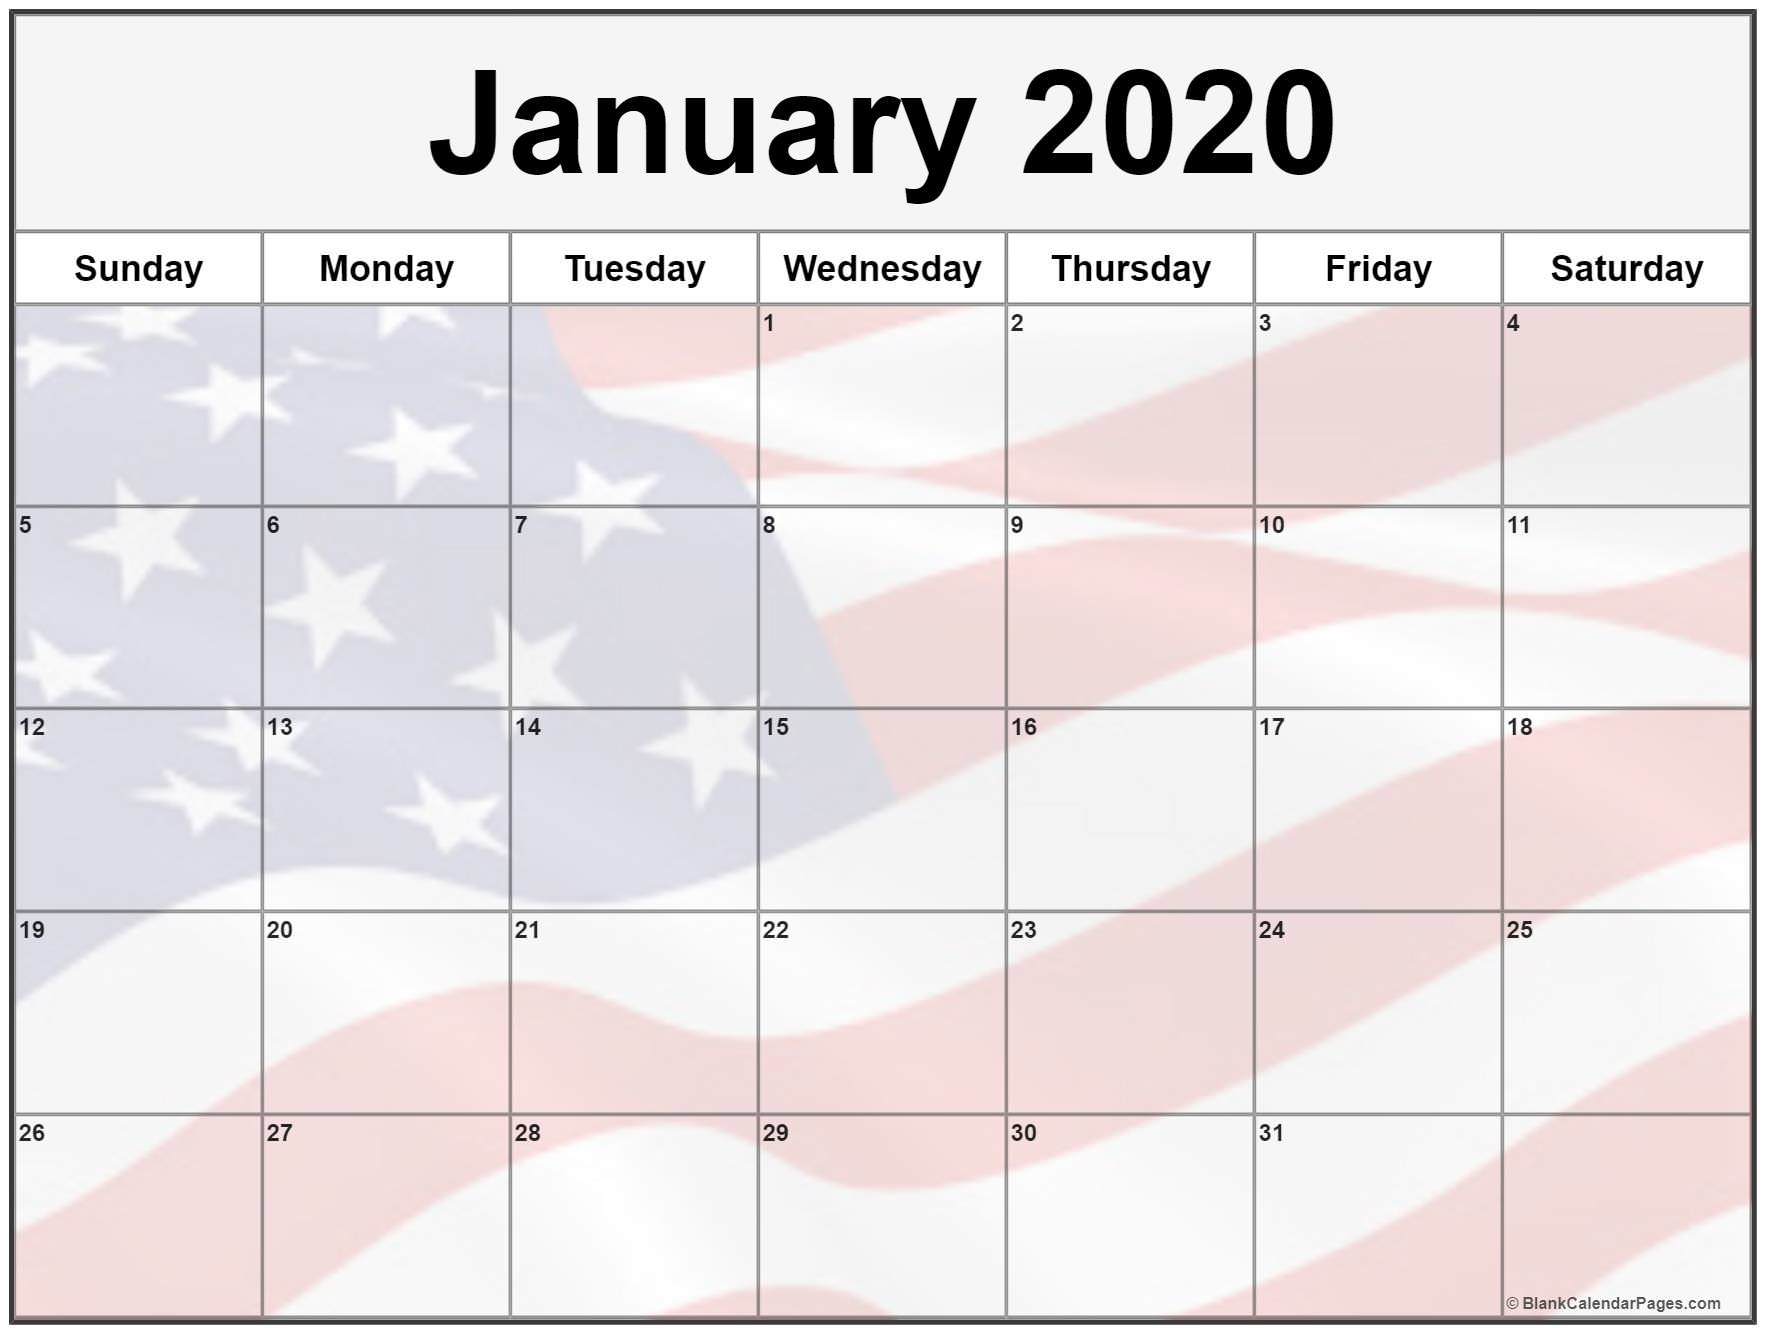 Collection Of January 2020 Photo Calendars With Image Filters.